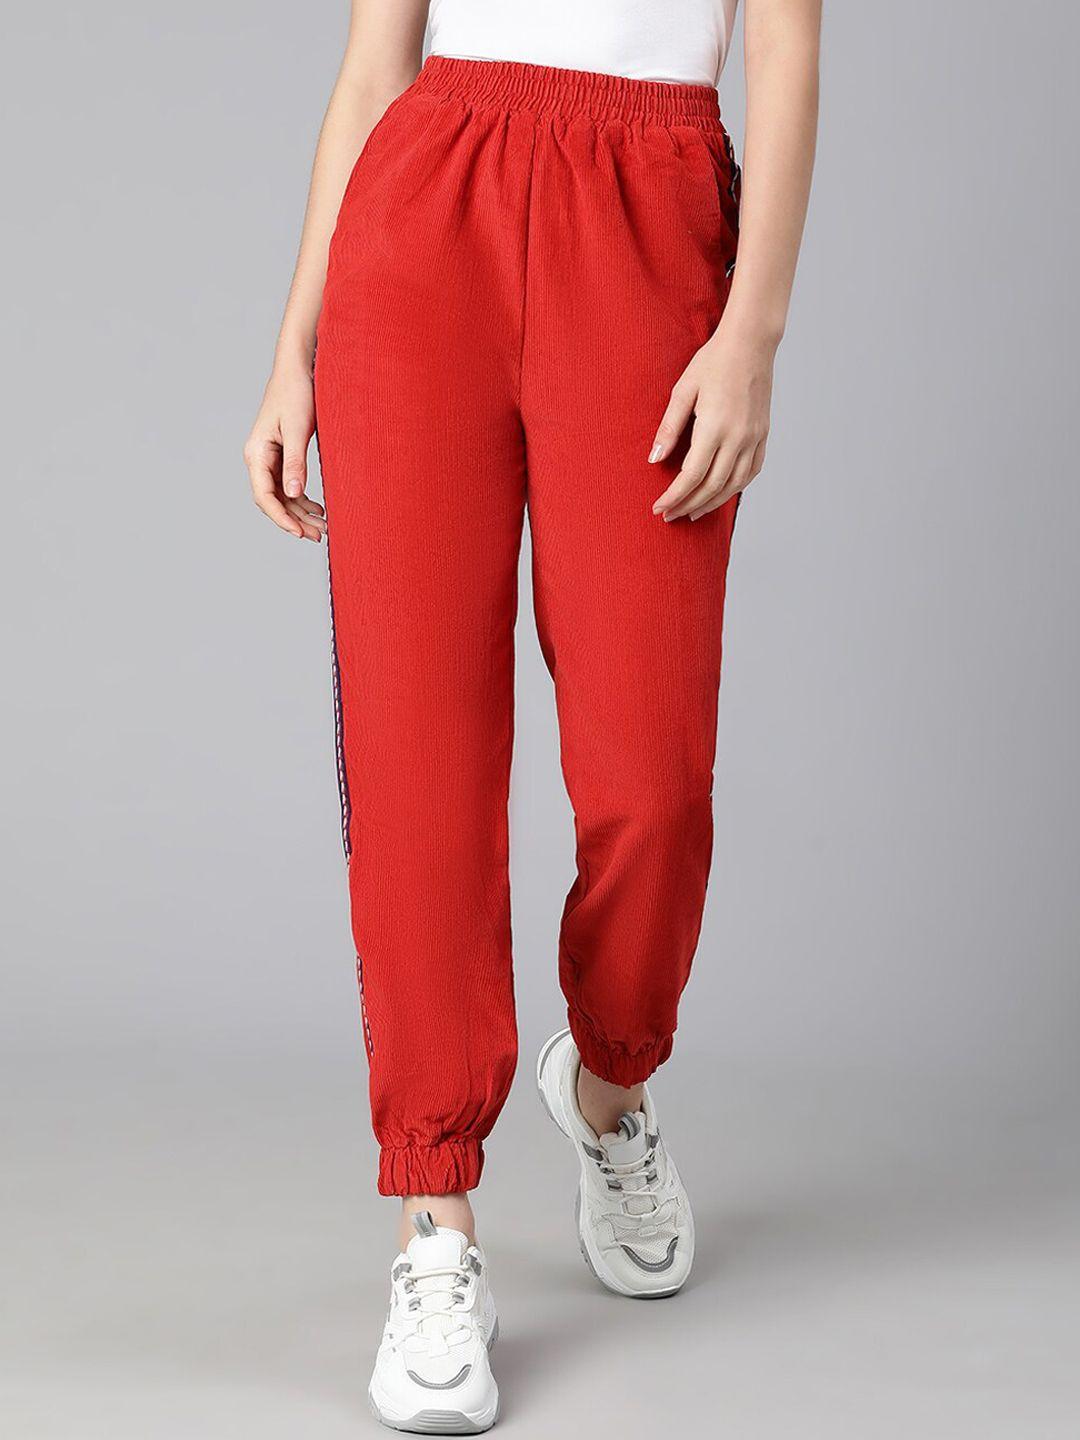 oxolloxo women red joggers trousers